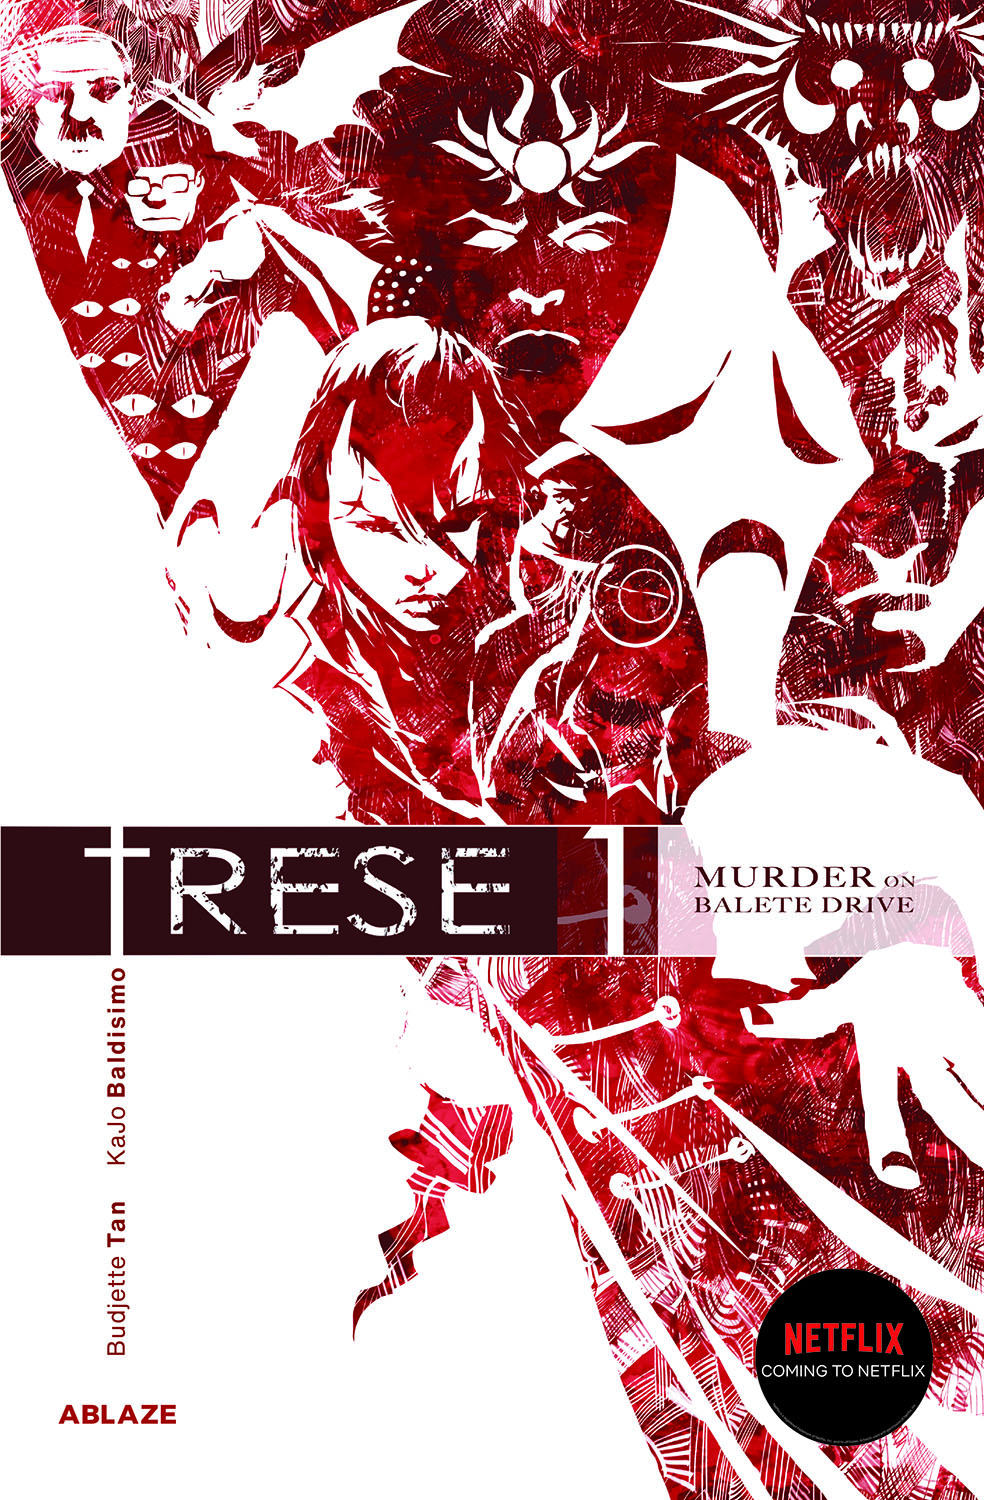 TRESE-VOL1-FRONT-COVER